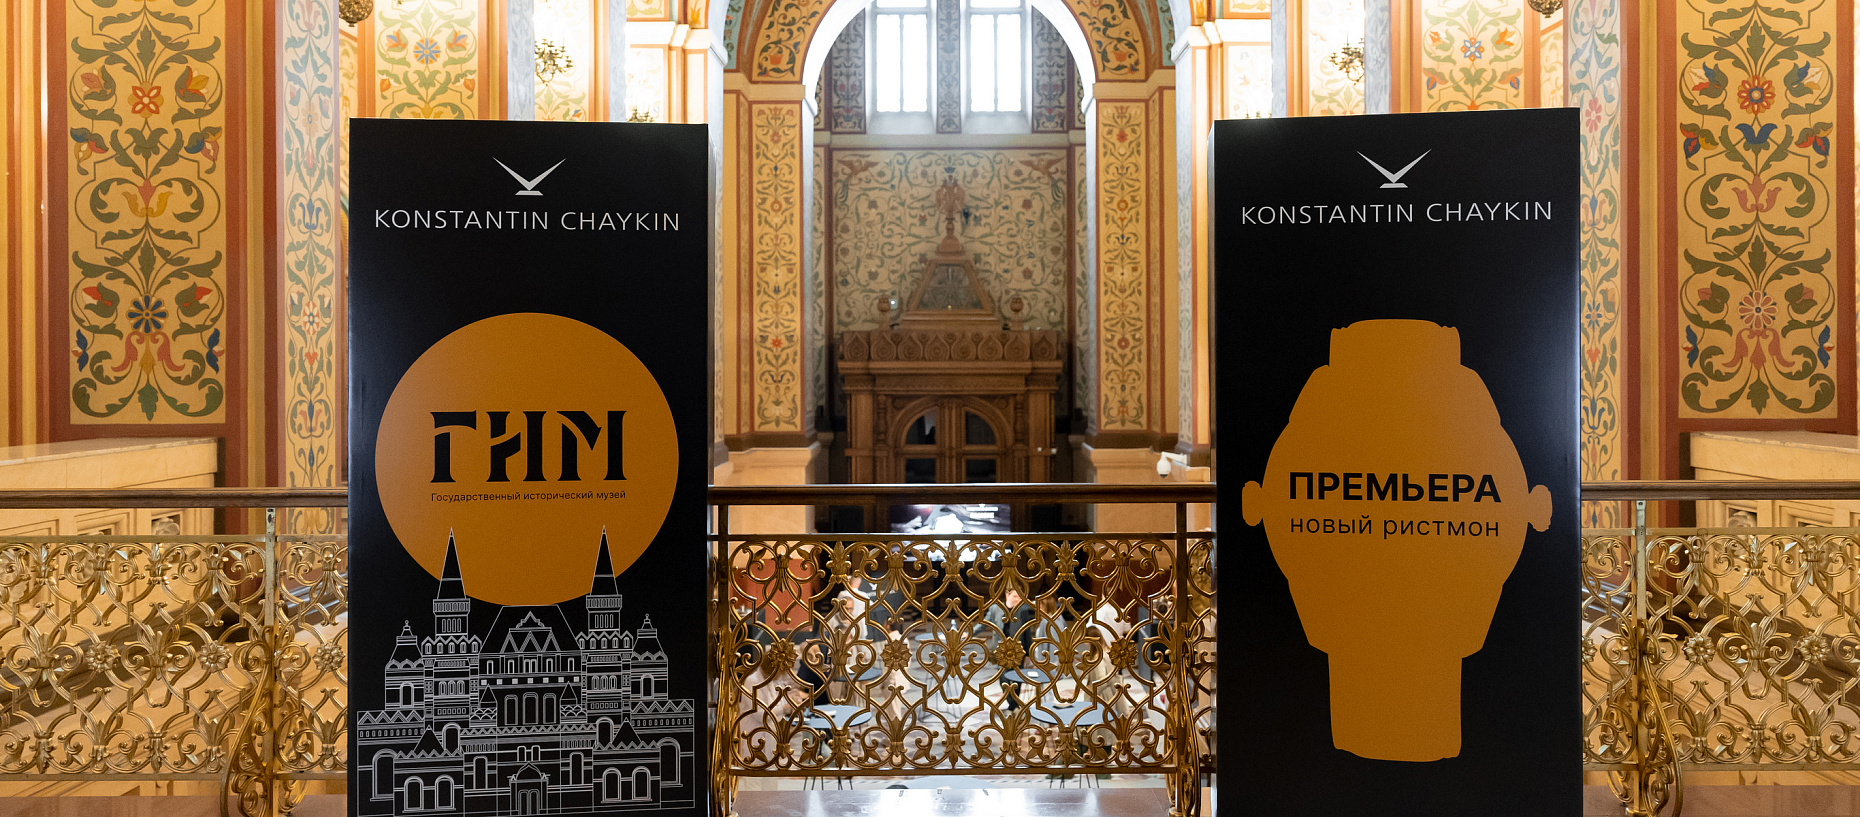 Konstantin Chaykin press event at the State Historical Museum